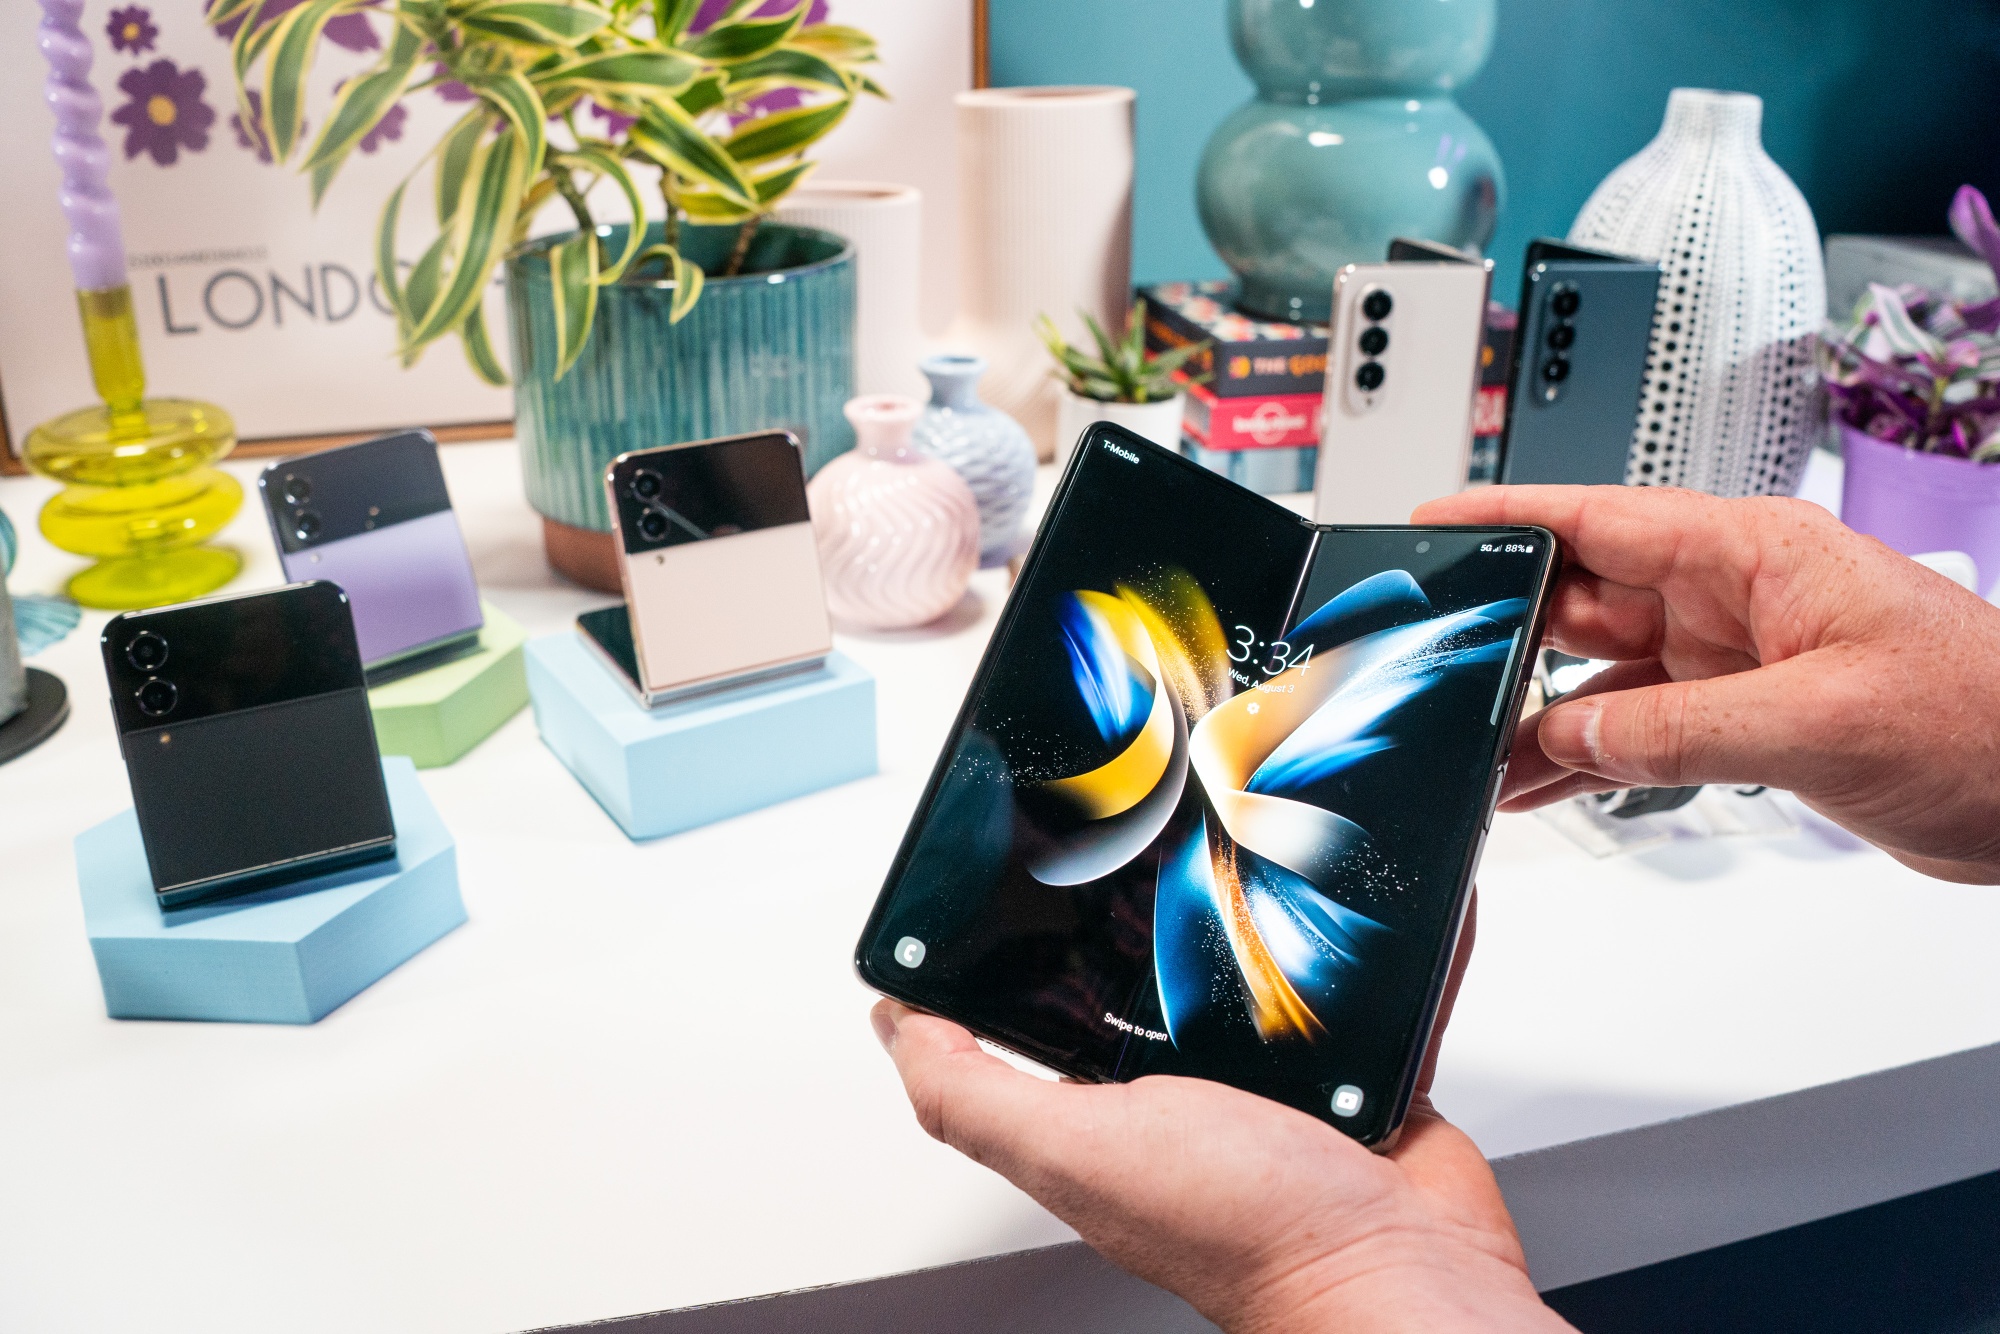 Samsung Galaxy Z Fold 3, Galaxy Z Flip 3 India launch on August 20: Compare  specs, prices of foldable smartphones, News